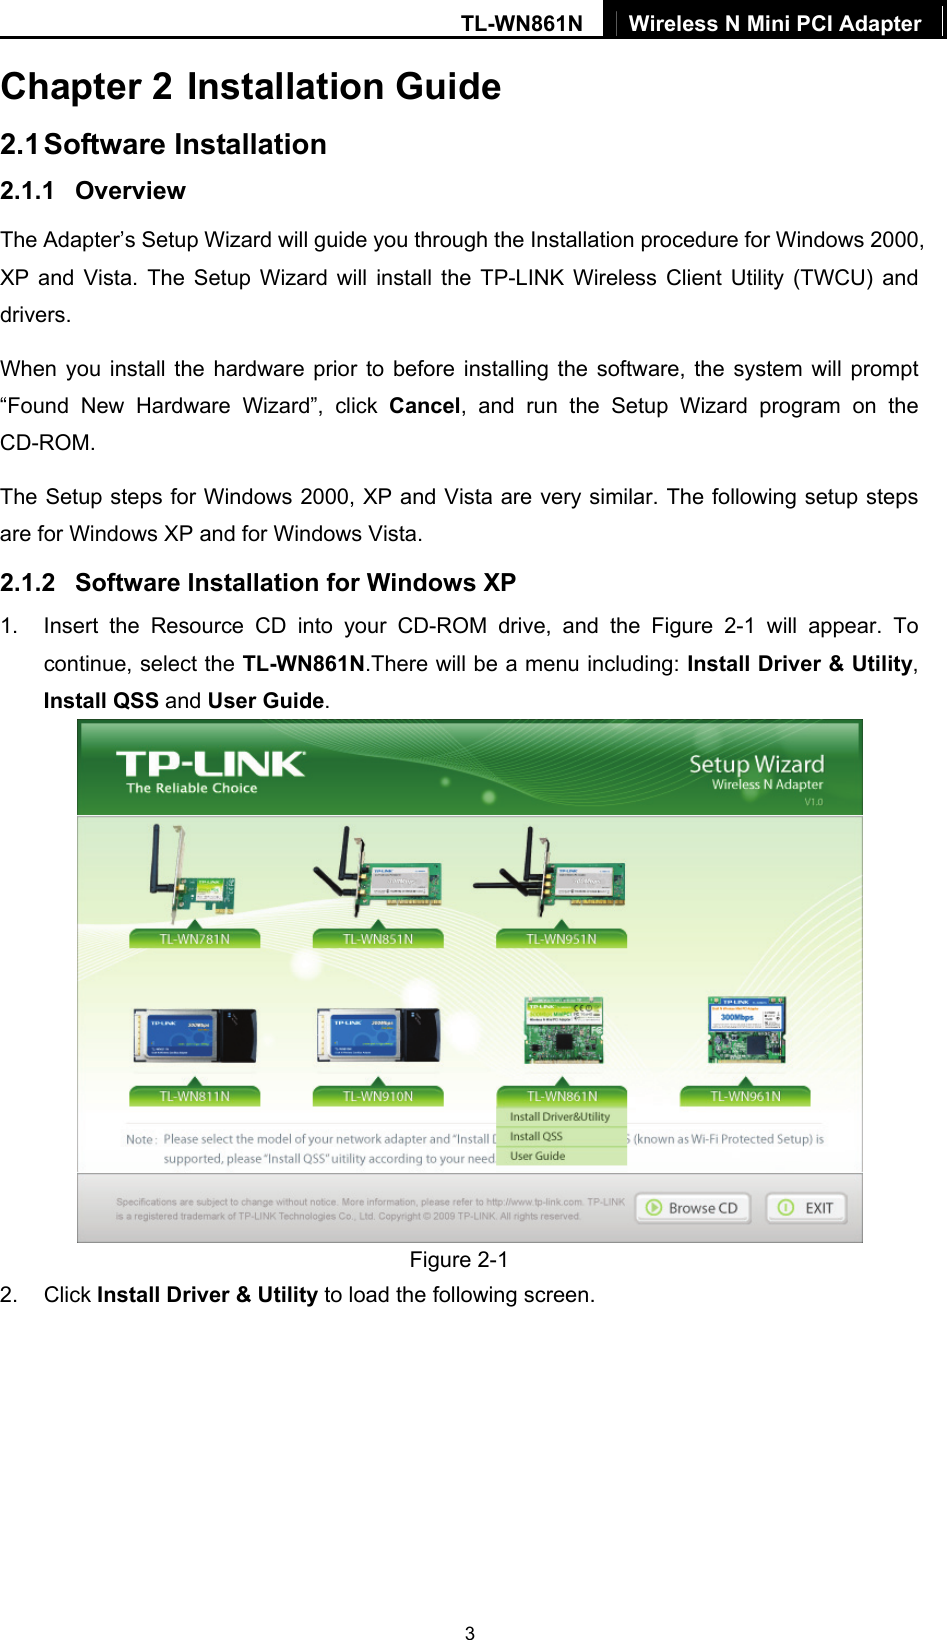 TL-WN861N  Wireless N Mini PCI Adapter   3Chapter 2 Installation Guide 2.1 Software Installation 2.1.1  Overview The Adapter’s Setup Wizard will guide you through the Installation procedure for Windows 2000, XP and Vista. The Setup Wizard will install the TP-LINK Wireless Client Utility (TWCU) and drivers. When you install the hardware prior to before installing the software, the system will prompt “Found New Hardware Wizard”, click Cancel, and run the Setup Wizard program on the CD-ROM.  The Setup steps for Windows 2000, XP and Vista are very similar. The following setup steps are for Windows XP and for Windows Vista. 2.1.2  Software Installation for Windows XP 1.  Insert the Resource CD into your CD-ROM drive, and the Figure 2-1 will appear. To continue, select the TL-WN861N.There will be a menu including: Install Driver &amp; Utility, Install QSS and User Guide.  Figure 2-1 2. Click Install Driver &amp; Utility to load the following screen. 